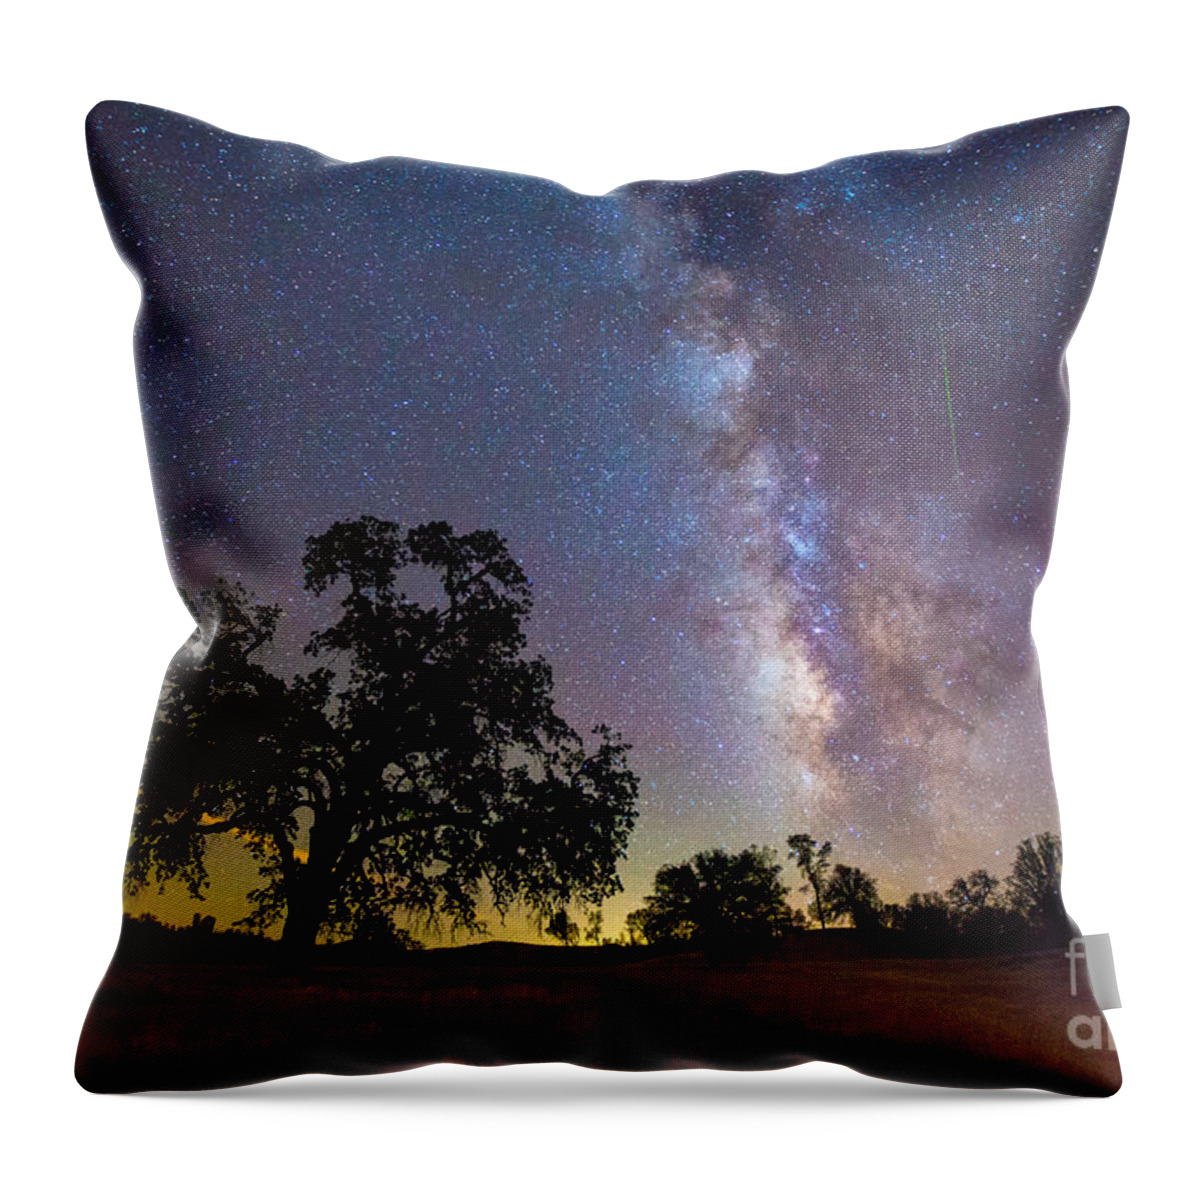 Milky Way Throw Pillow featuring the photograph The Milky Way With One Perseid Meteor by Mimi Ditchie